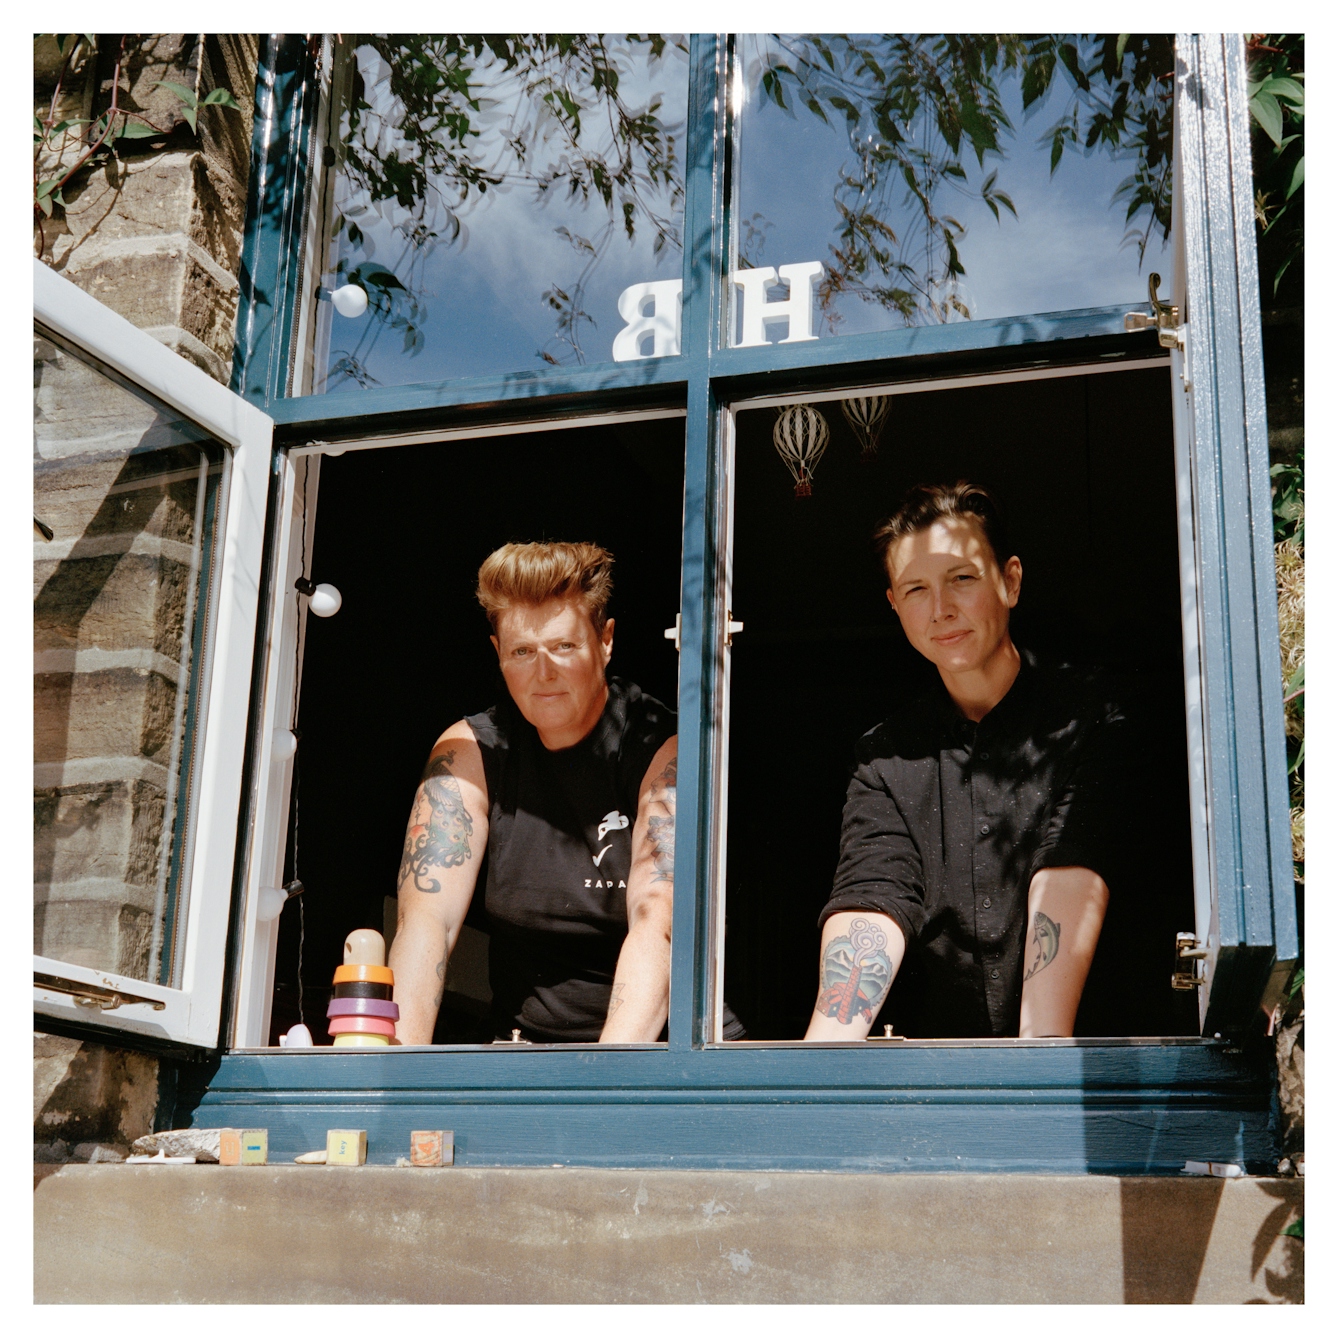 Portrait photograph of Belinda and Heidi standing in an open window, looking outside towards the camera. The woman on the left has short brown hair and is wearing a black sleeveless top, she has several tattoos on her arms. The woman on the left has short dark hair and is wearing a black shirt - she has several tattoos on her arms. 

They are both looking directly at the camera. There is a stack of colourful wooden rings on the windowsill and above their heads, a wooden initial H and B. 